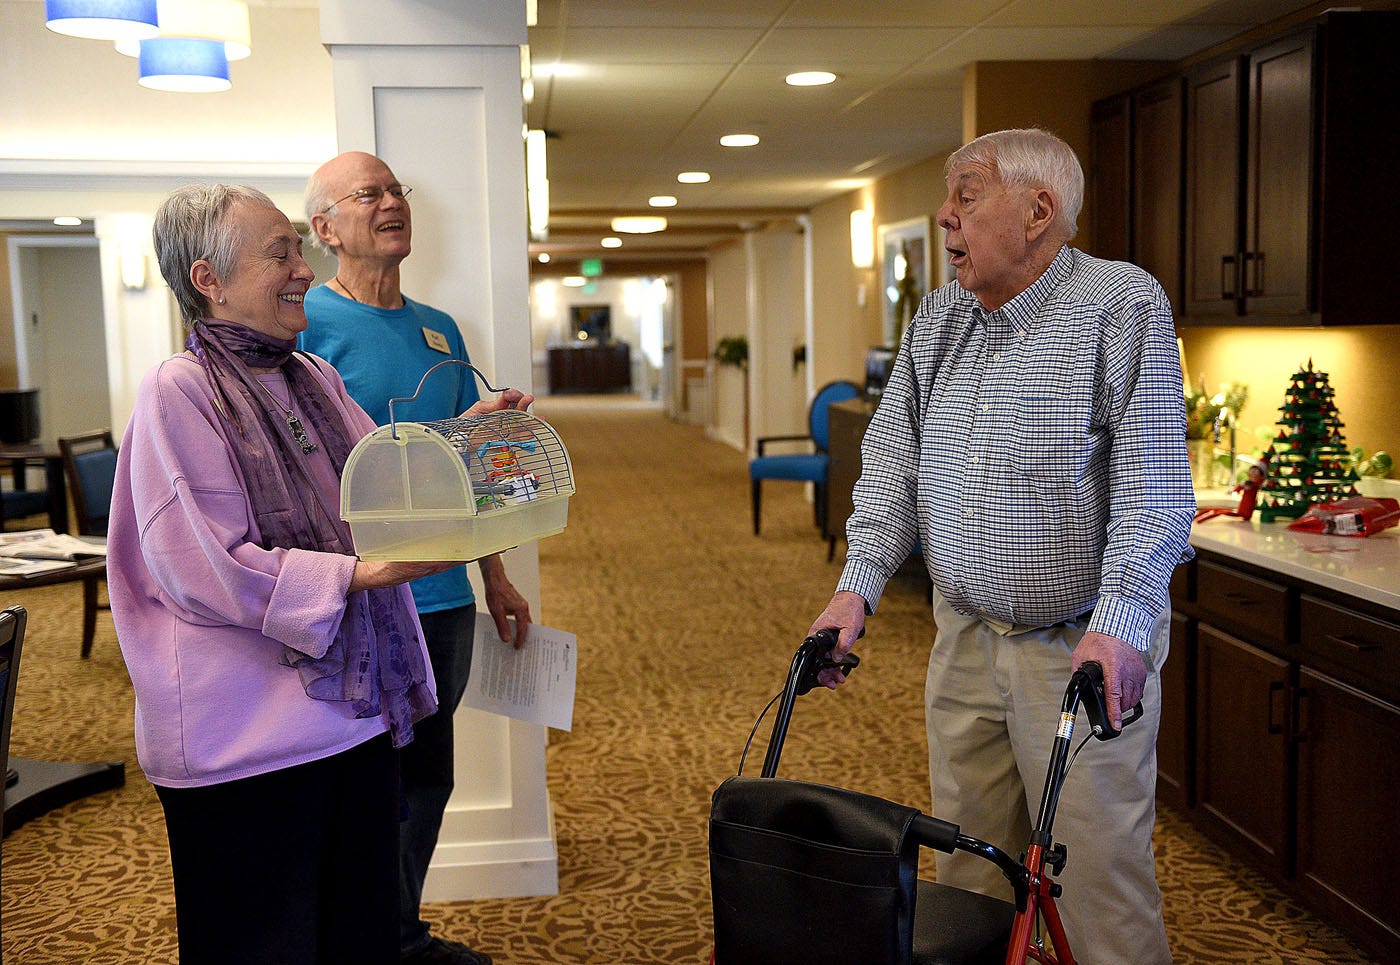 Ken Snow speaks with fellow RiverWoods Manchester residents Ann and Karl Hentz in an upstairs lobby.